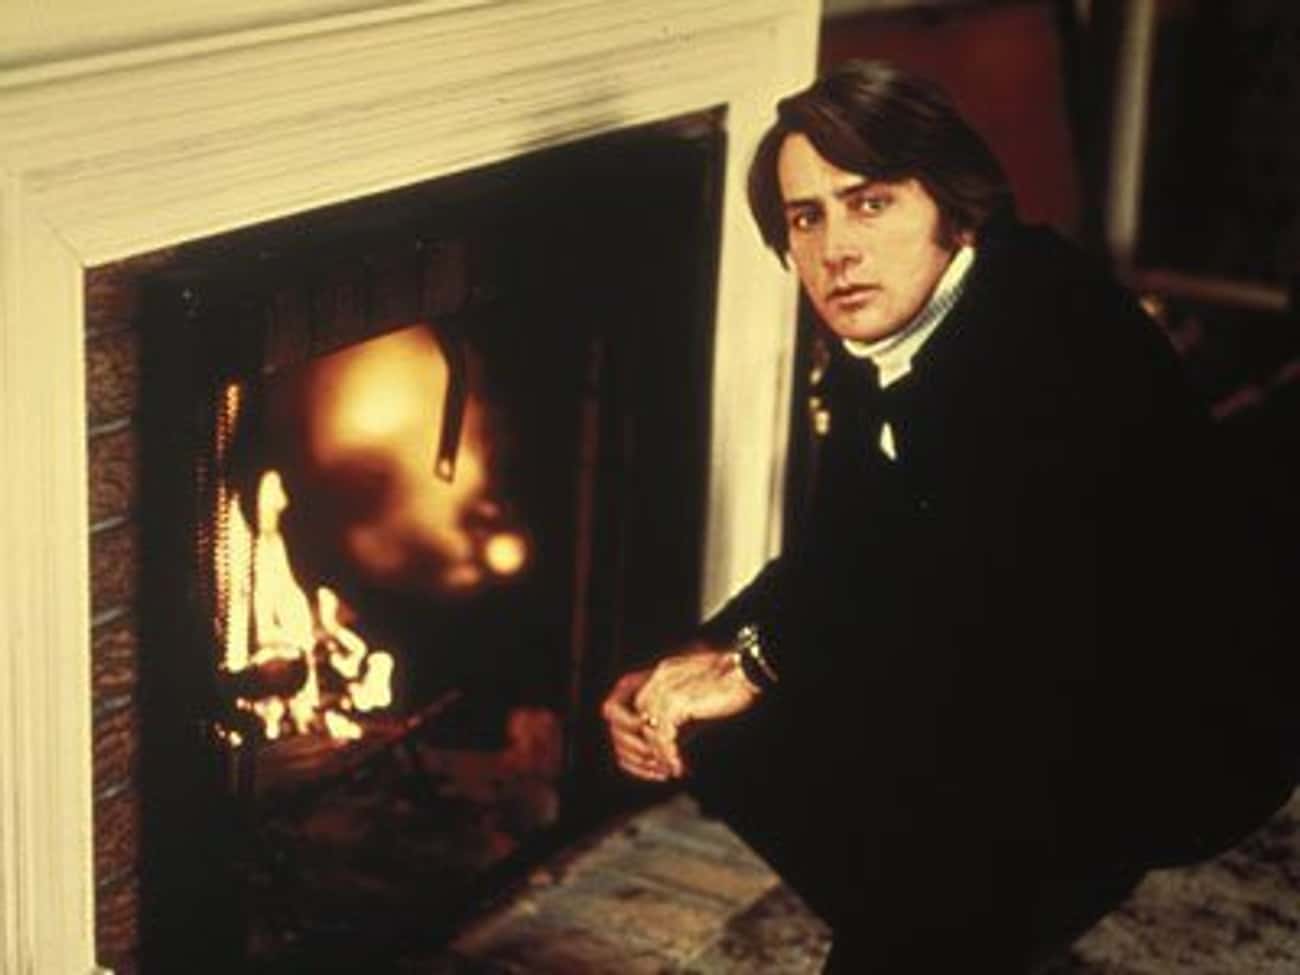 Young Martin Sheen in Black Suit with Long Hair